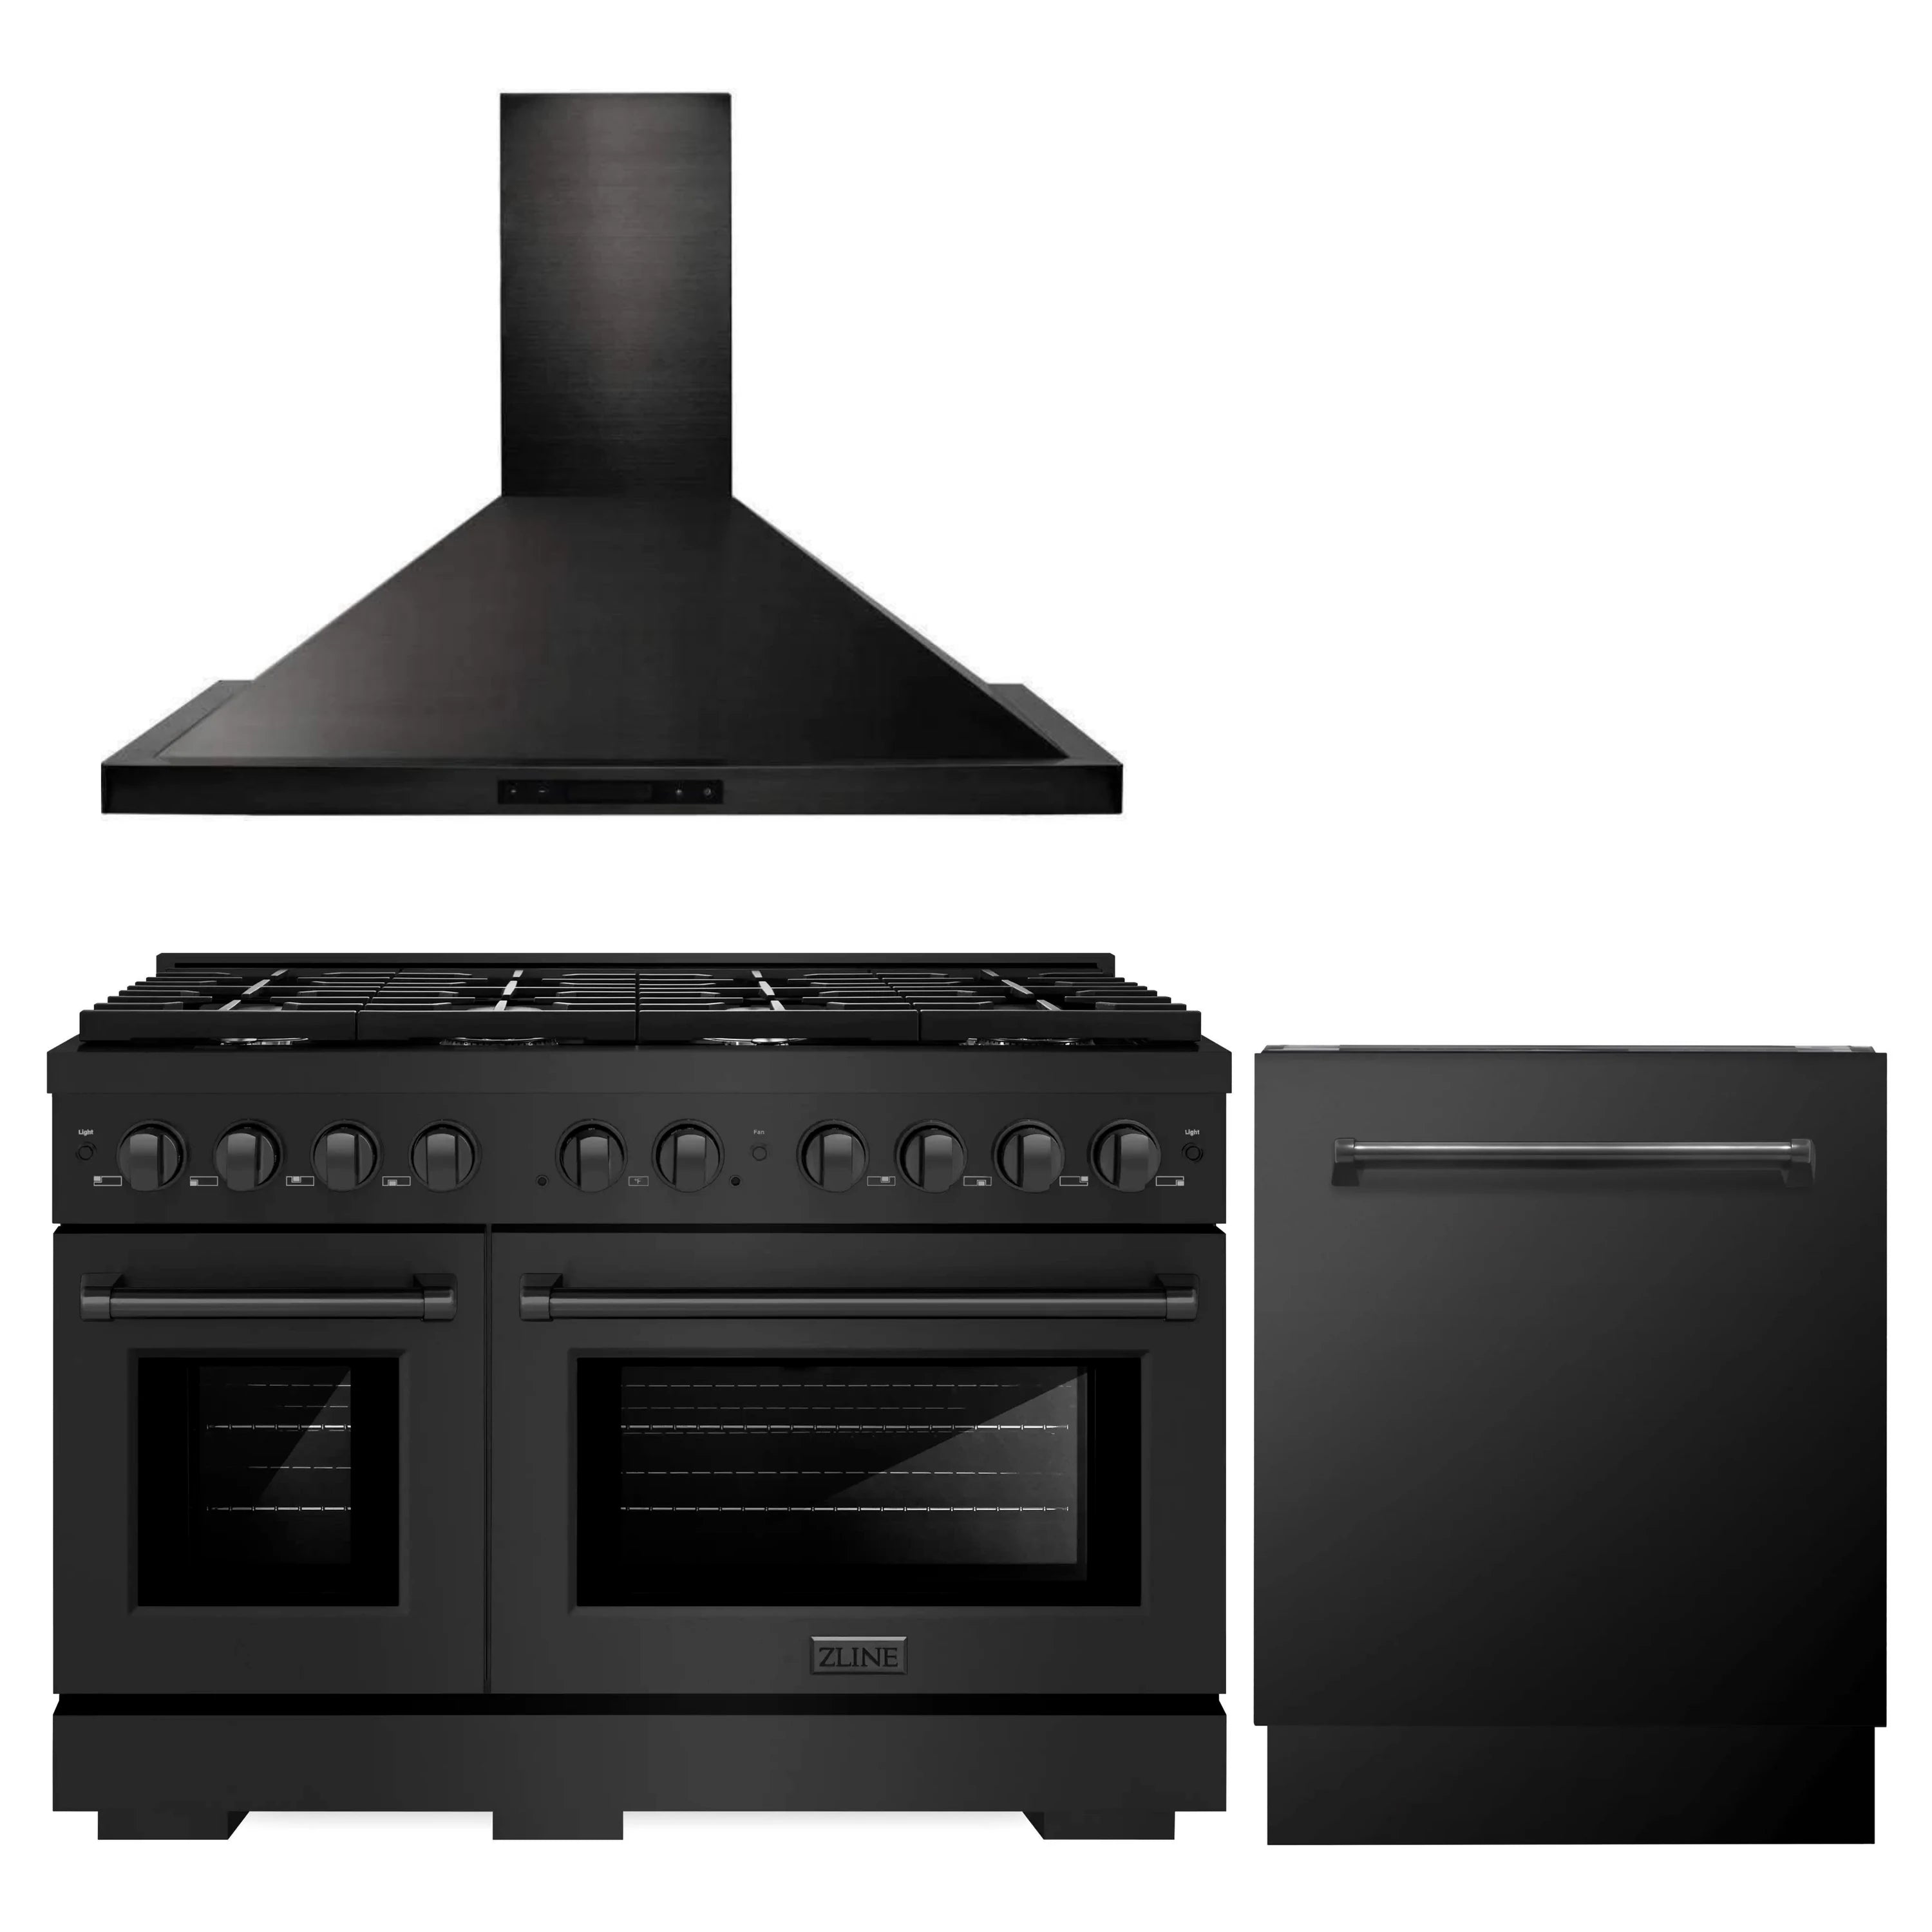 ZLINE 3-Piece Appliance Package - 48-Inch Gas Range, Convertible Wall Mount Hood, and 3-Rack Dishwasher in Black Stainless Steel (3KP-RGBRH48-DWV)